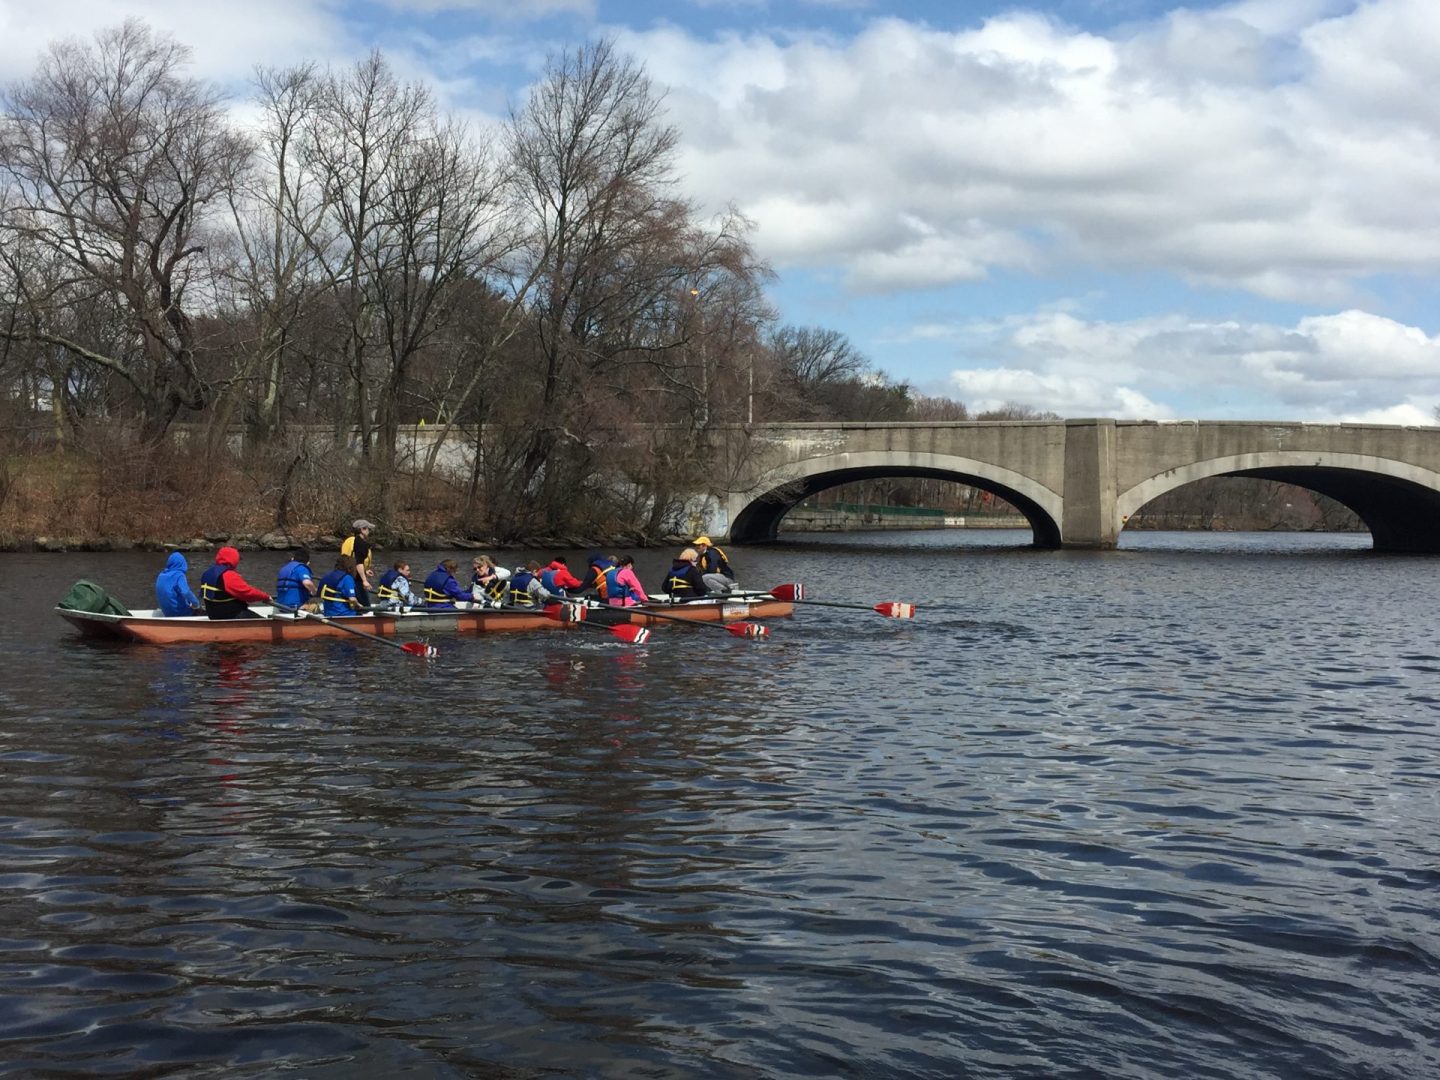 Large red canoe in water with several athletes and coaches on board. Paddling towards bridge with two large passages to move through. Blue, cloudy sky with large, bare trees on the shore.